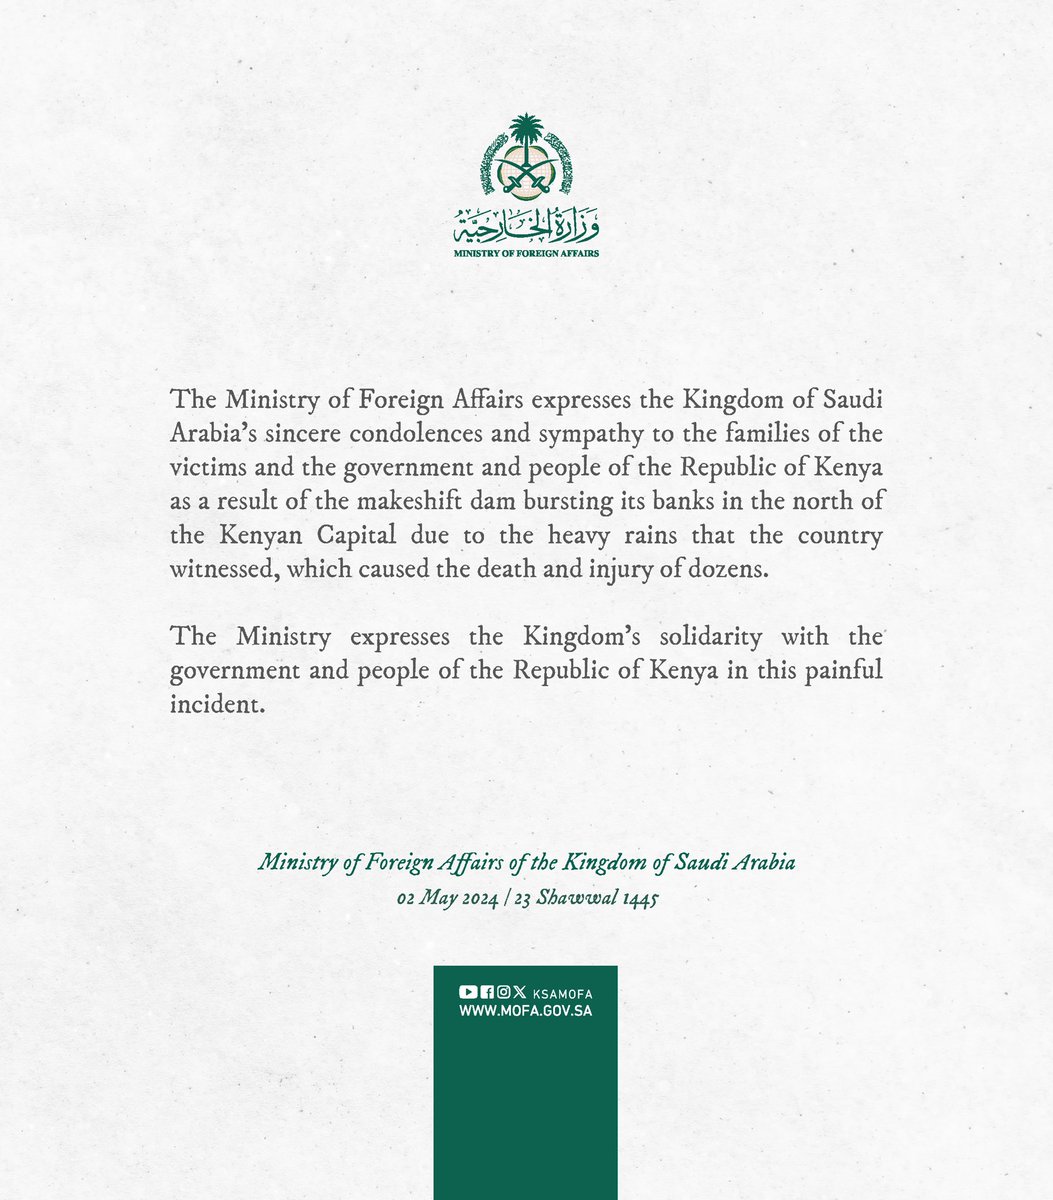 #Statement | The Foreign Ministry expresses the Kingdom of Saudi Arabia’s sincere condolences and sympathy to the families of the victims and the government and people of the Republic of Kenya as a result of the makeshift dam bursting its banks in the north of the Kenyan Capital.